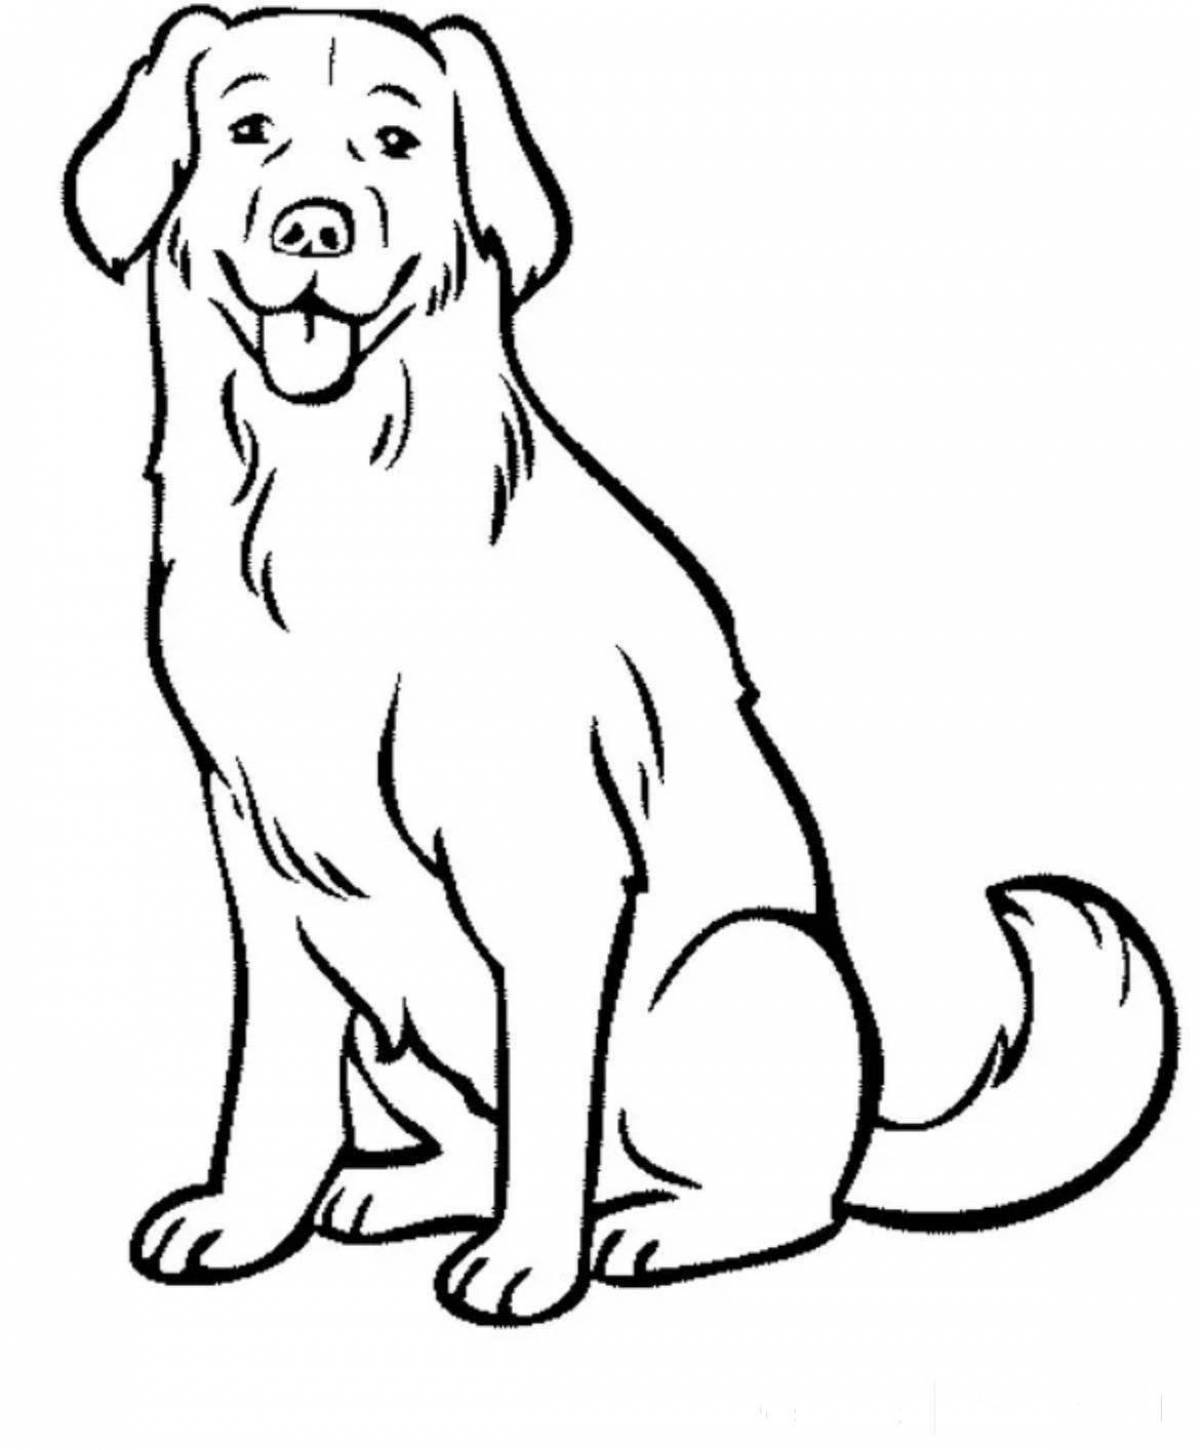 Funny chink coloring page